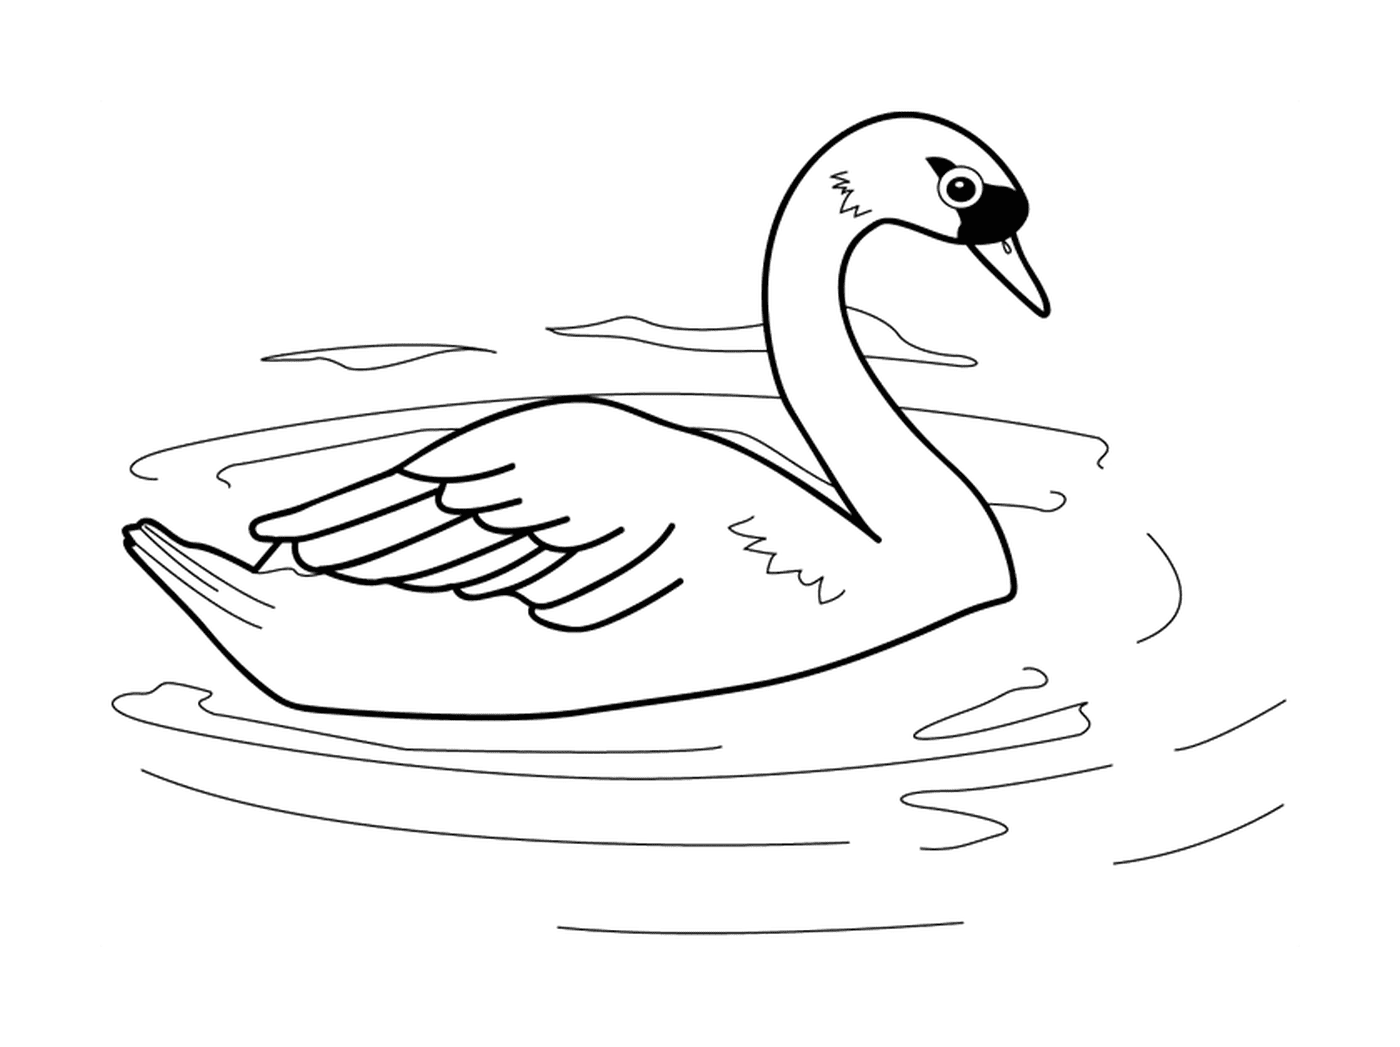  A swan in the water 